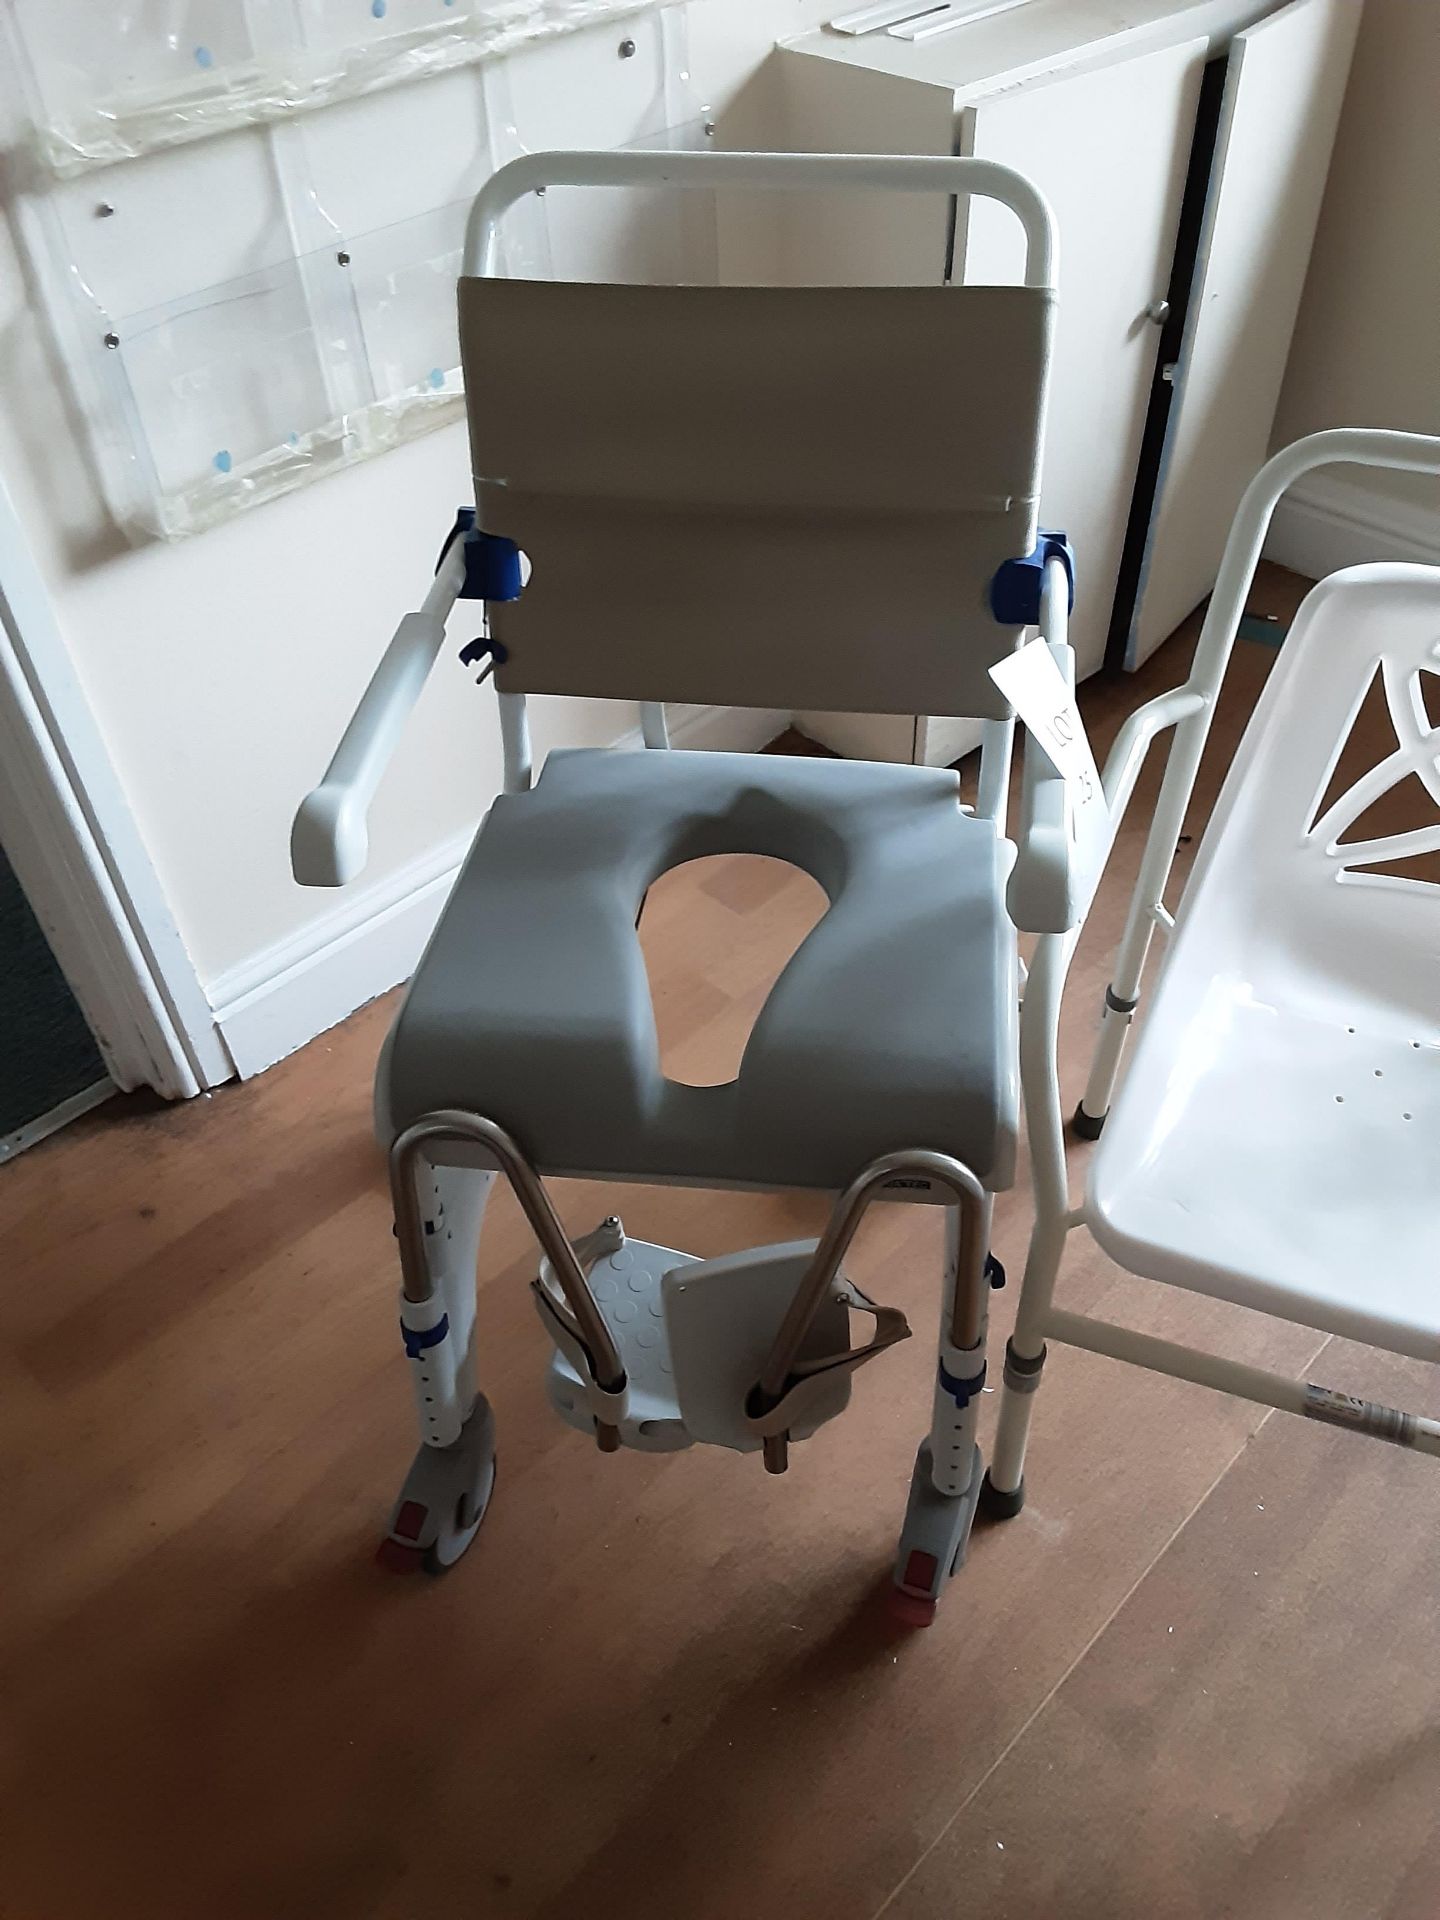 Auqatec Wheelchair & Shower Chair - Image 3 of 4